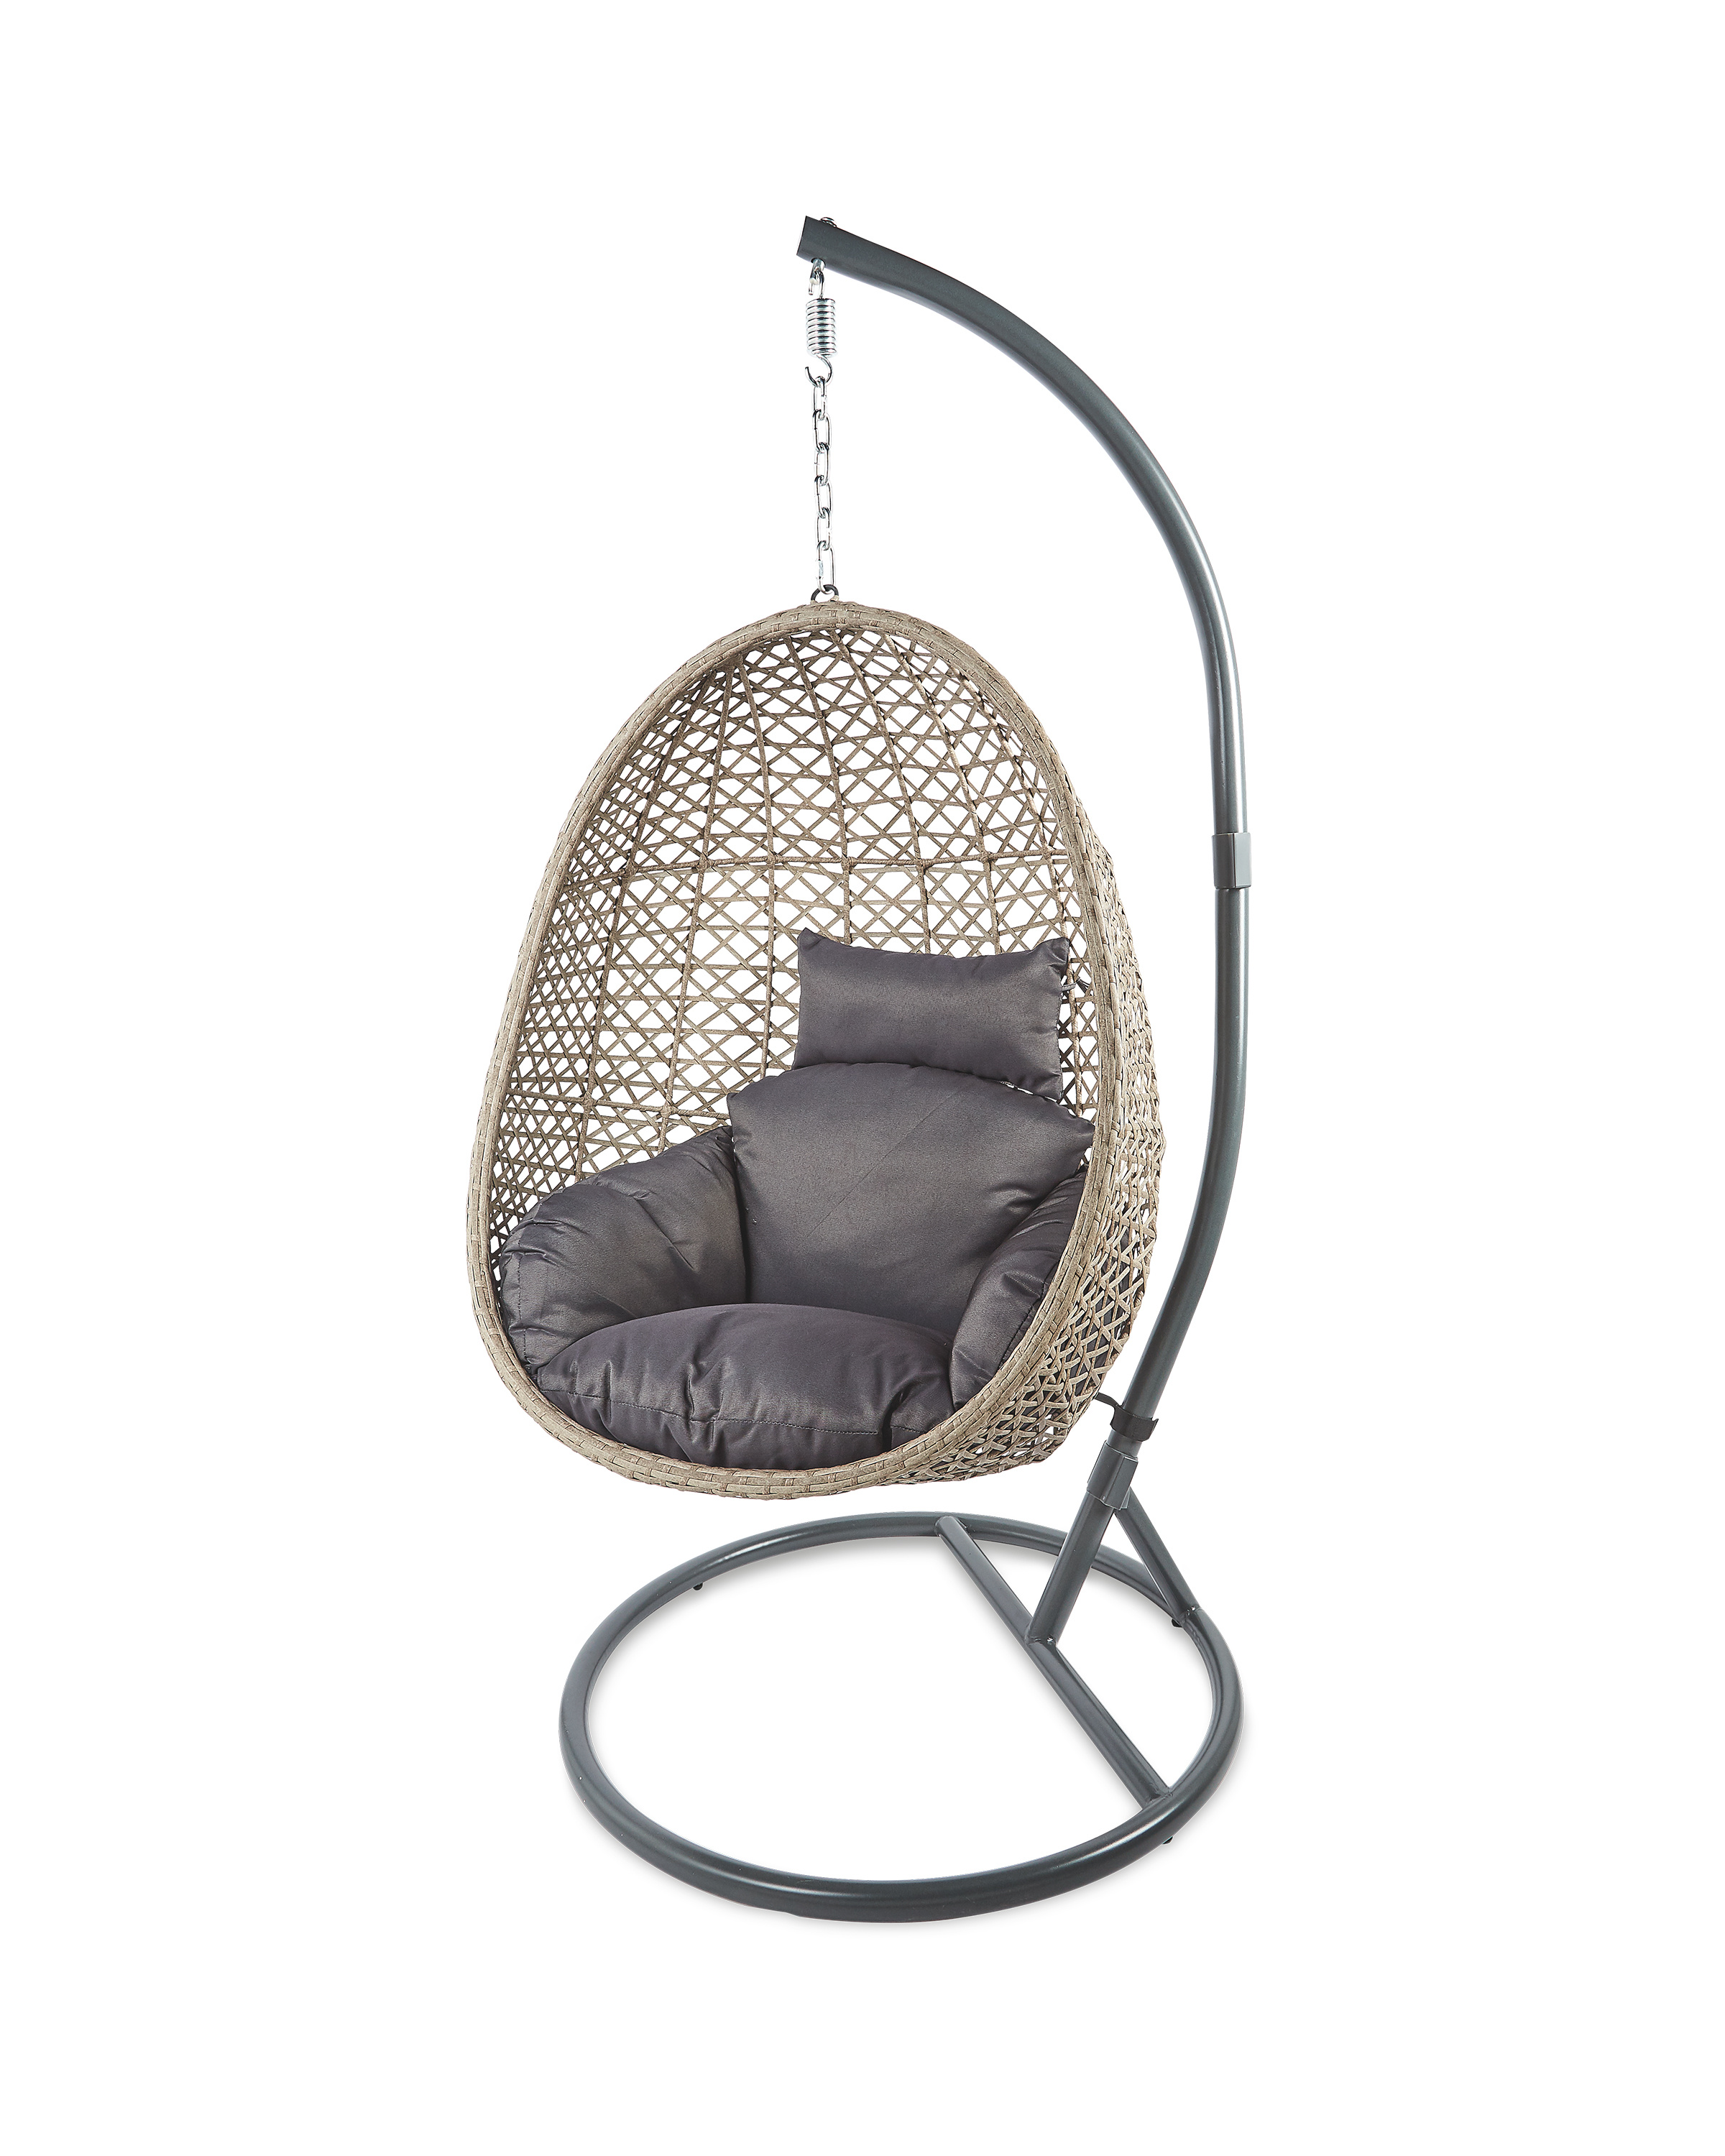 Gardenline Hanging Egg Chair Aldi Uk, Are Egg Chairs Safe For Dogs